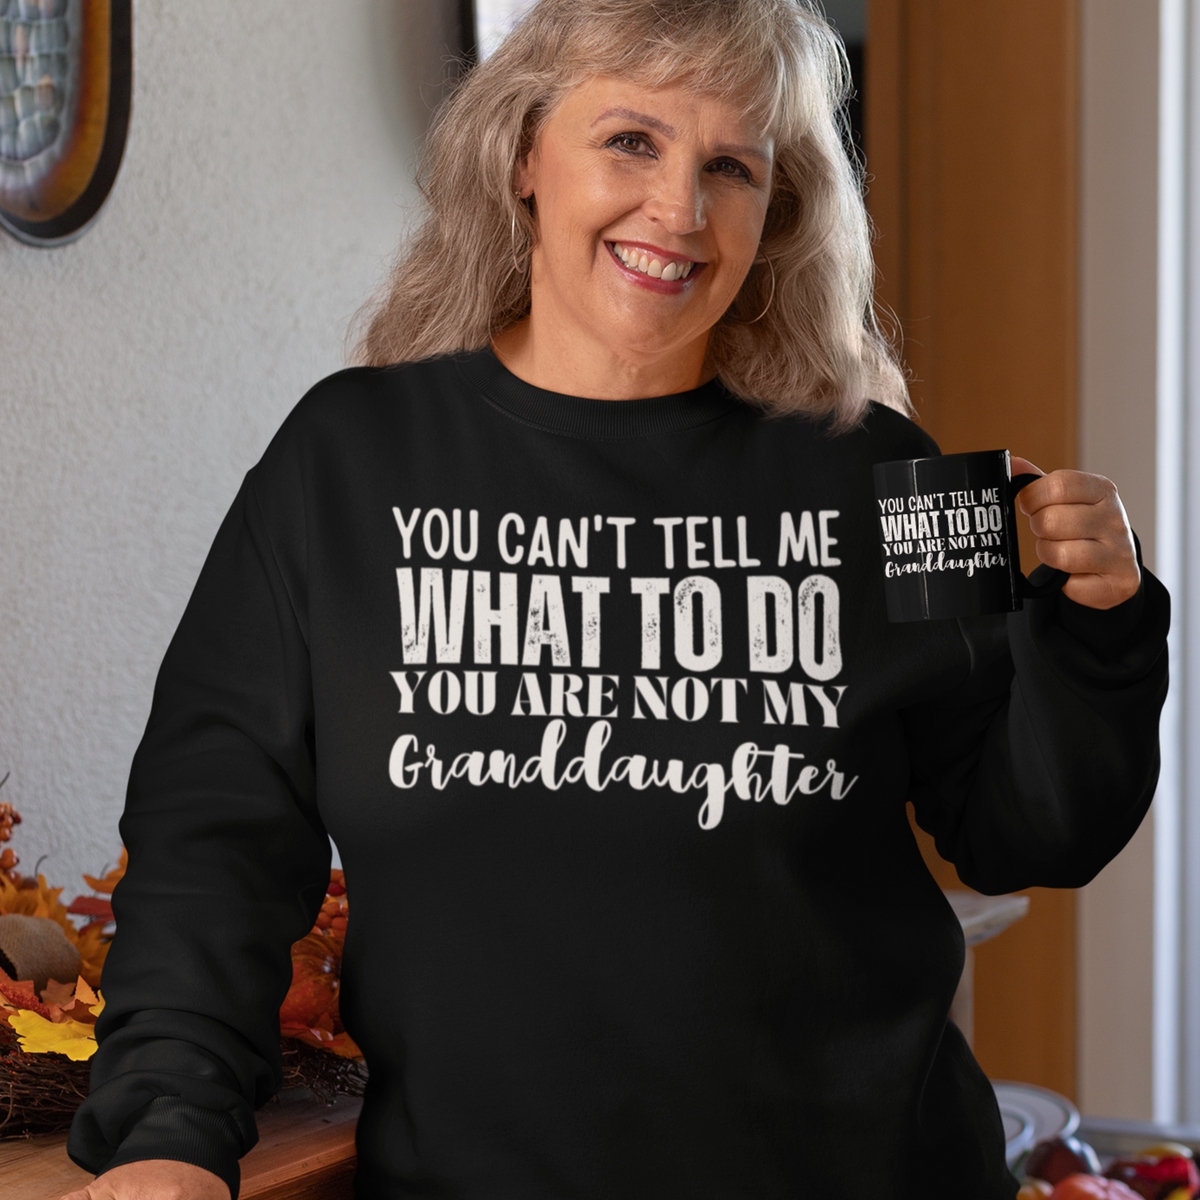 Granddad sweatshirt, fathers day shirt, funny mens shirt, sweatshirt, gift for him, gift for her, funny grandma tee, funny granddad tee, new papa shirt, father sweatshirt, you can't tell me what to do you are not my granddaughter, new granddaddy shirt